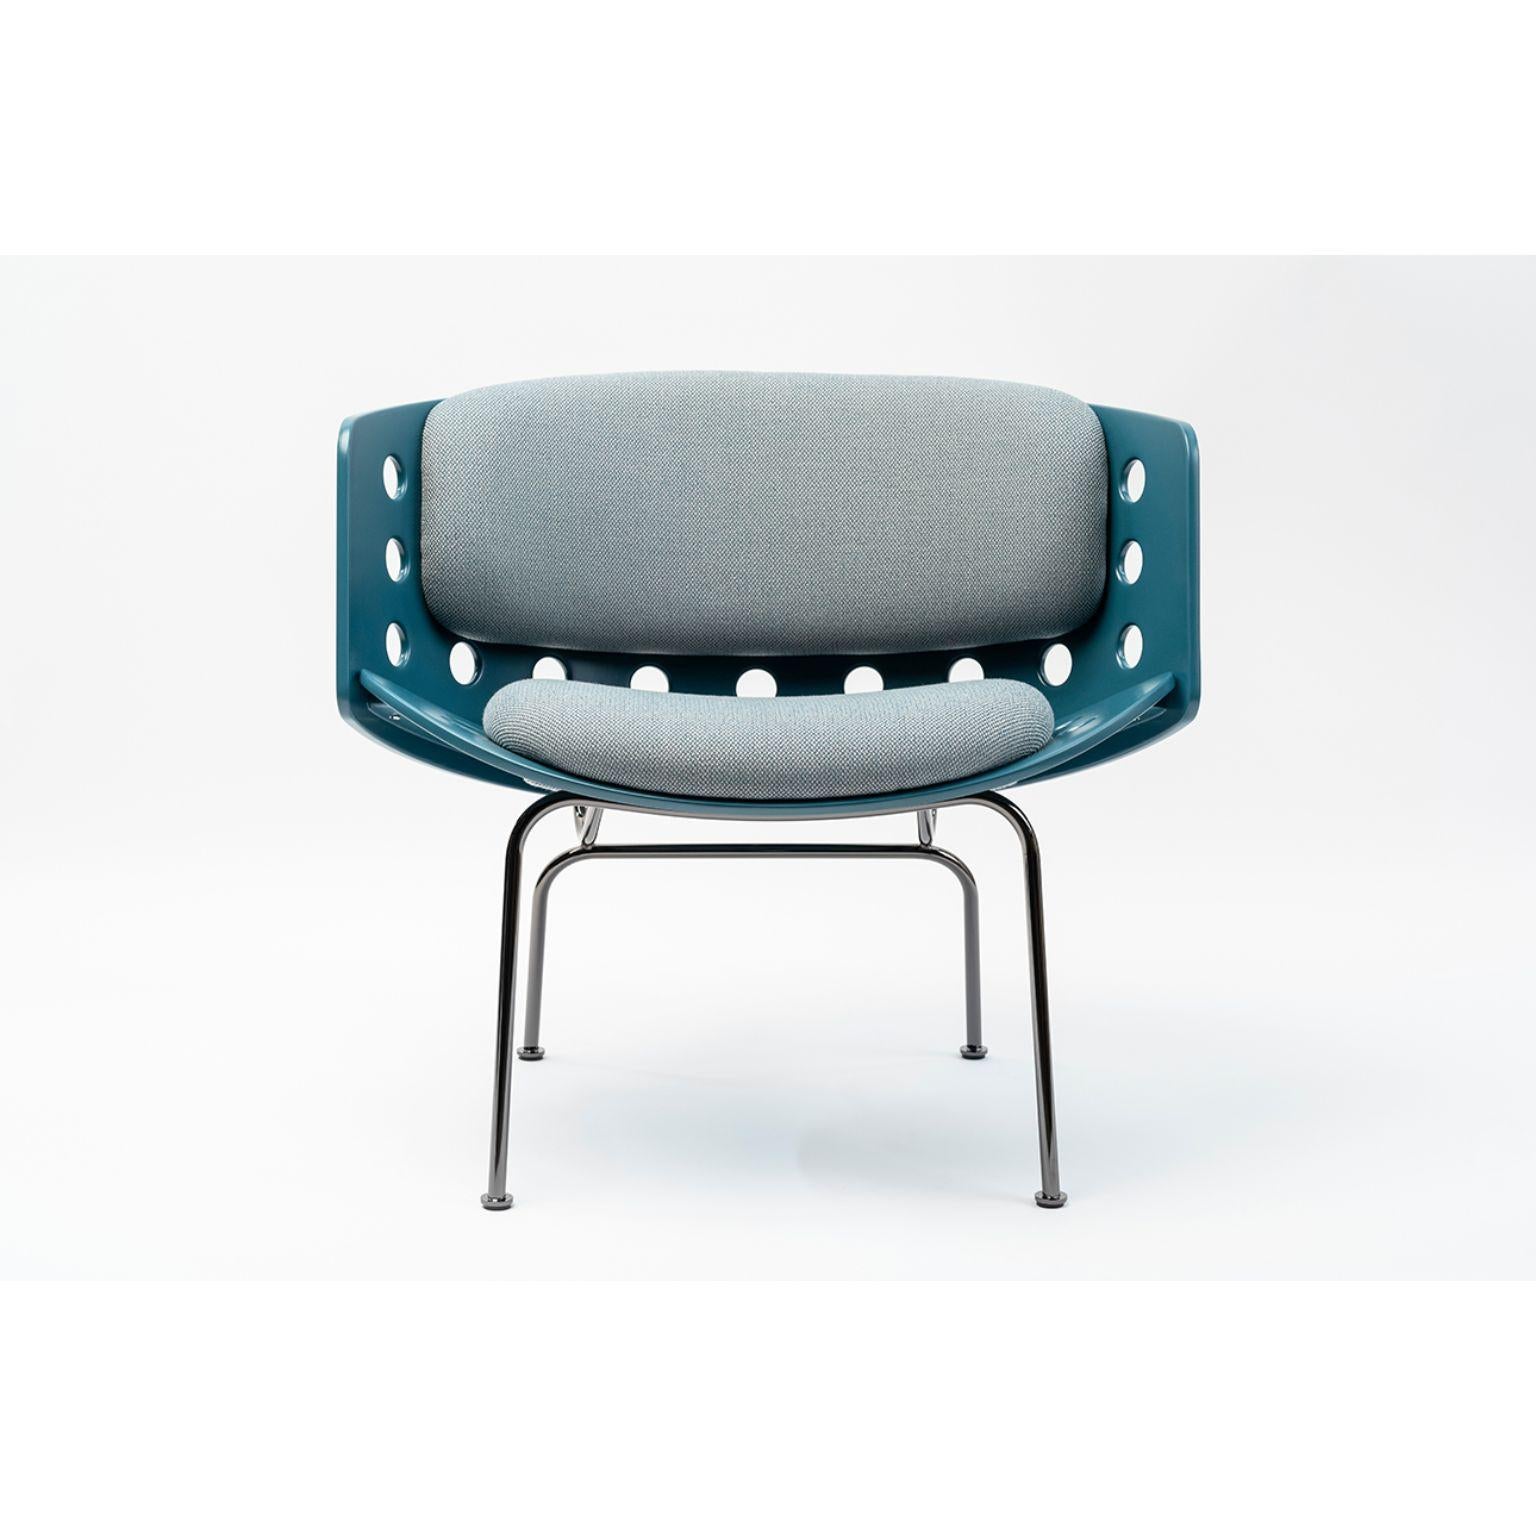 Melitea lounge chair by Luca Nichetto
Materials: Shell: Dark Green NCS 8010 B70G/Dark Yellow NCS 4050 Y20R/Duck Blue
 NCS 6020 B10G/Warm Light Grey NCS 2002 Y50R lacquered Polyurethane
 Upholstery: Fabric or Leather
 Structure: Black